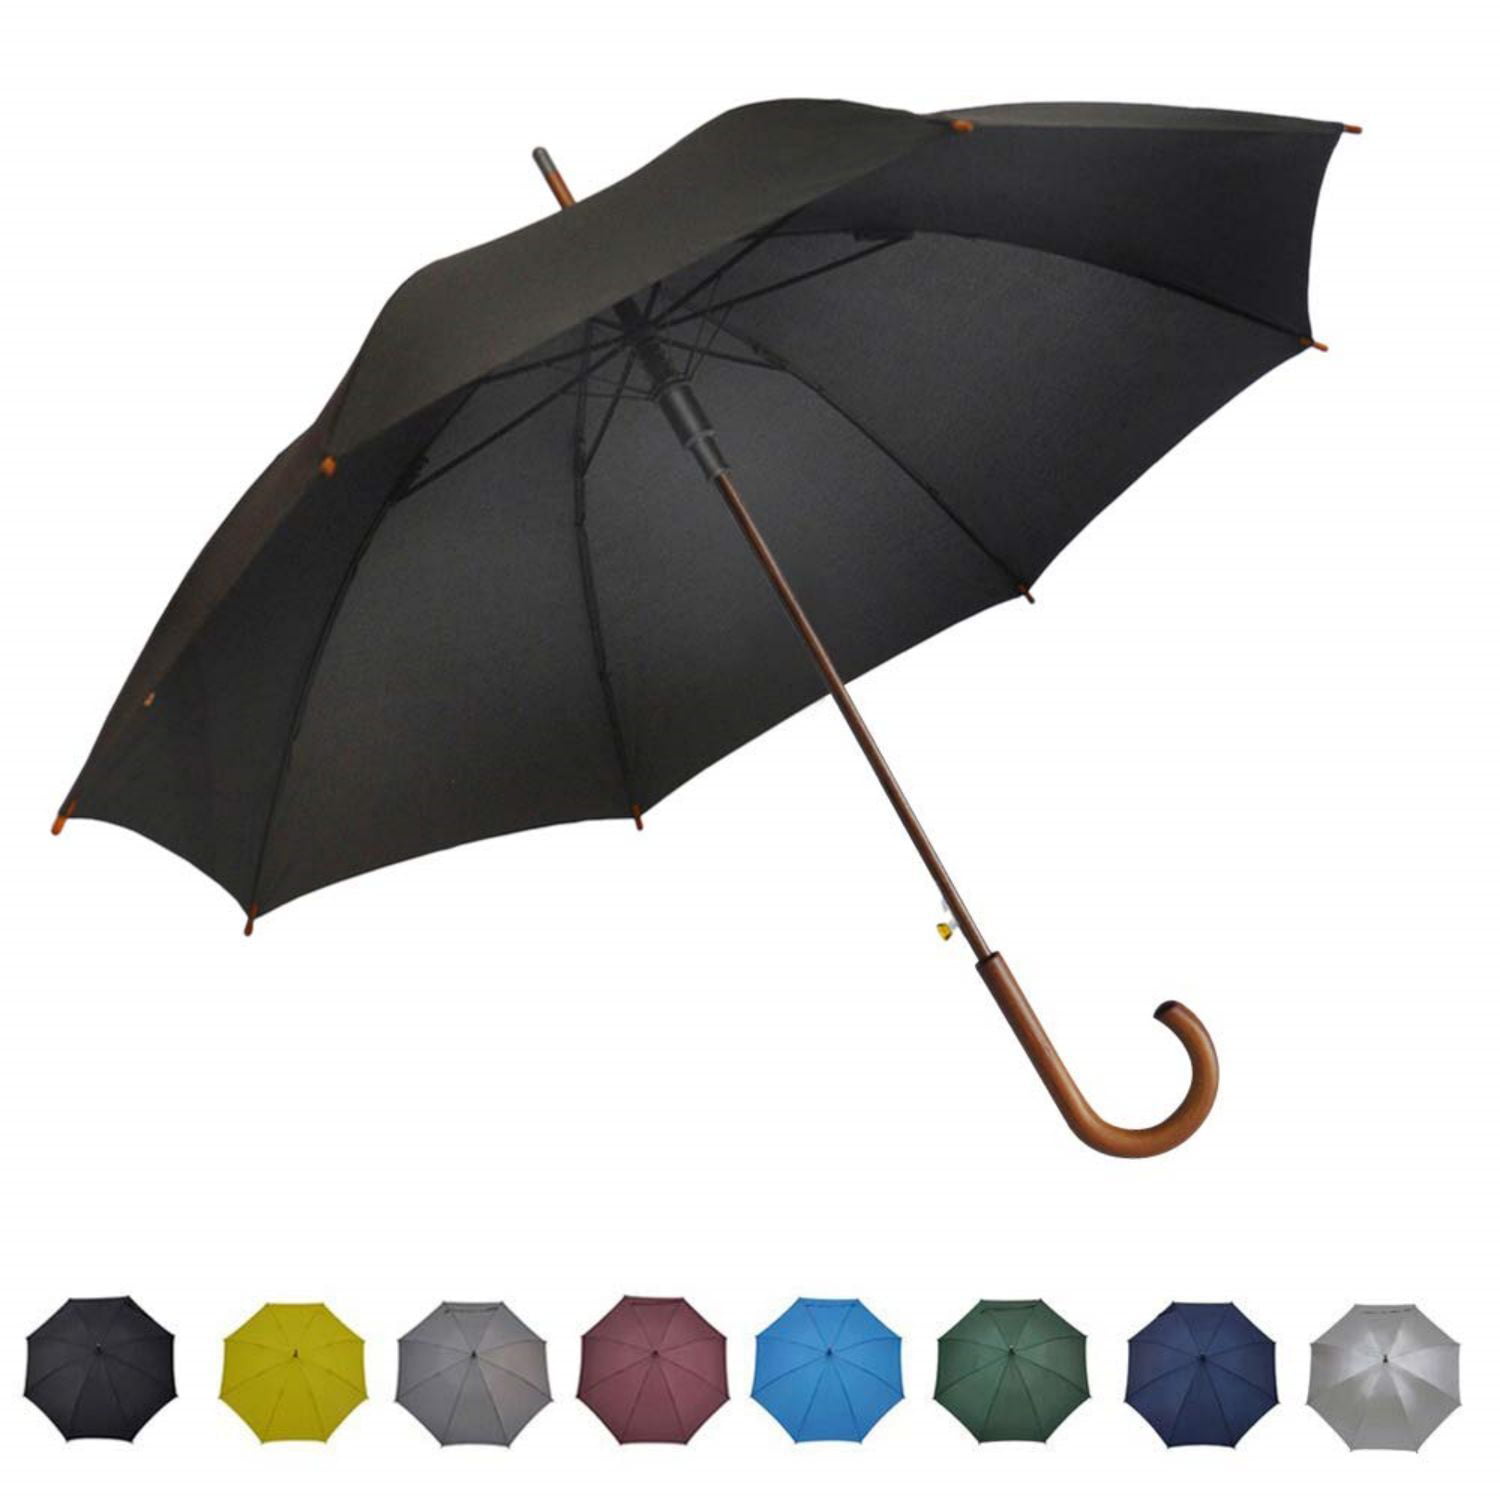 12 Ribs Windproof Travel Umbrella with Tefloning Canopy Auto Open/Close H4C4 